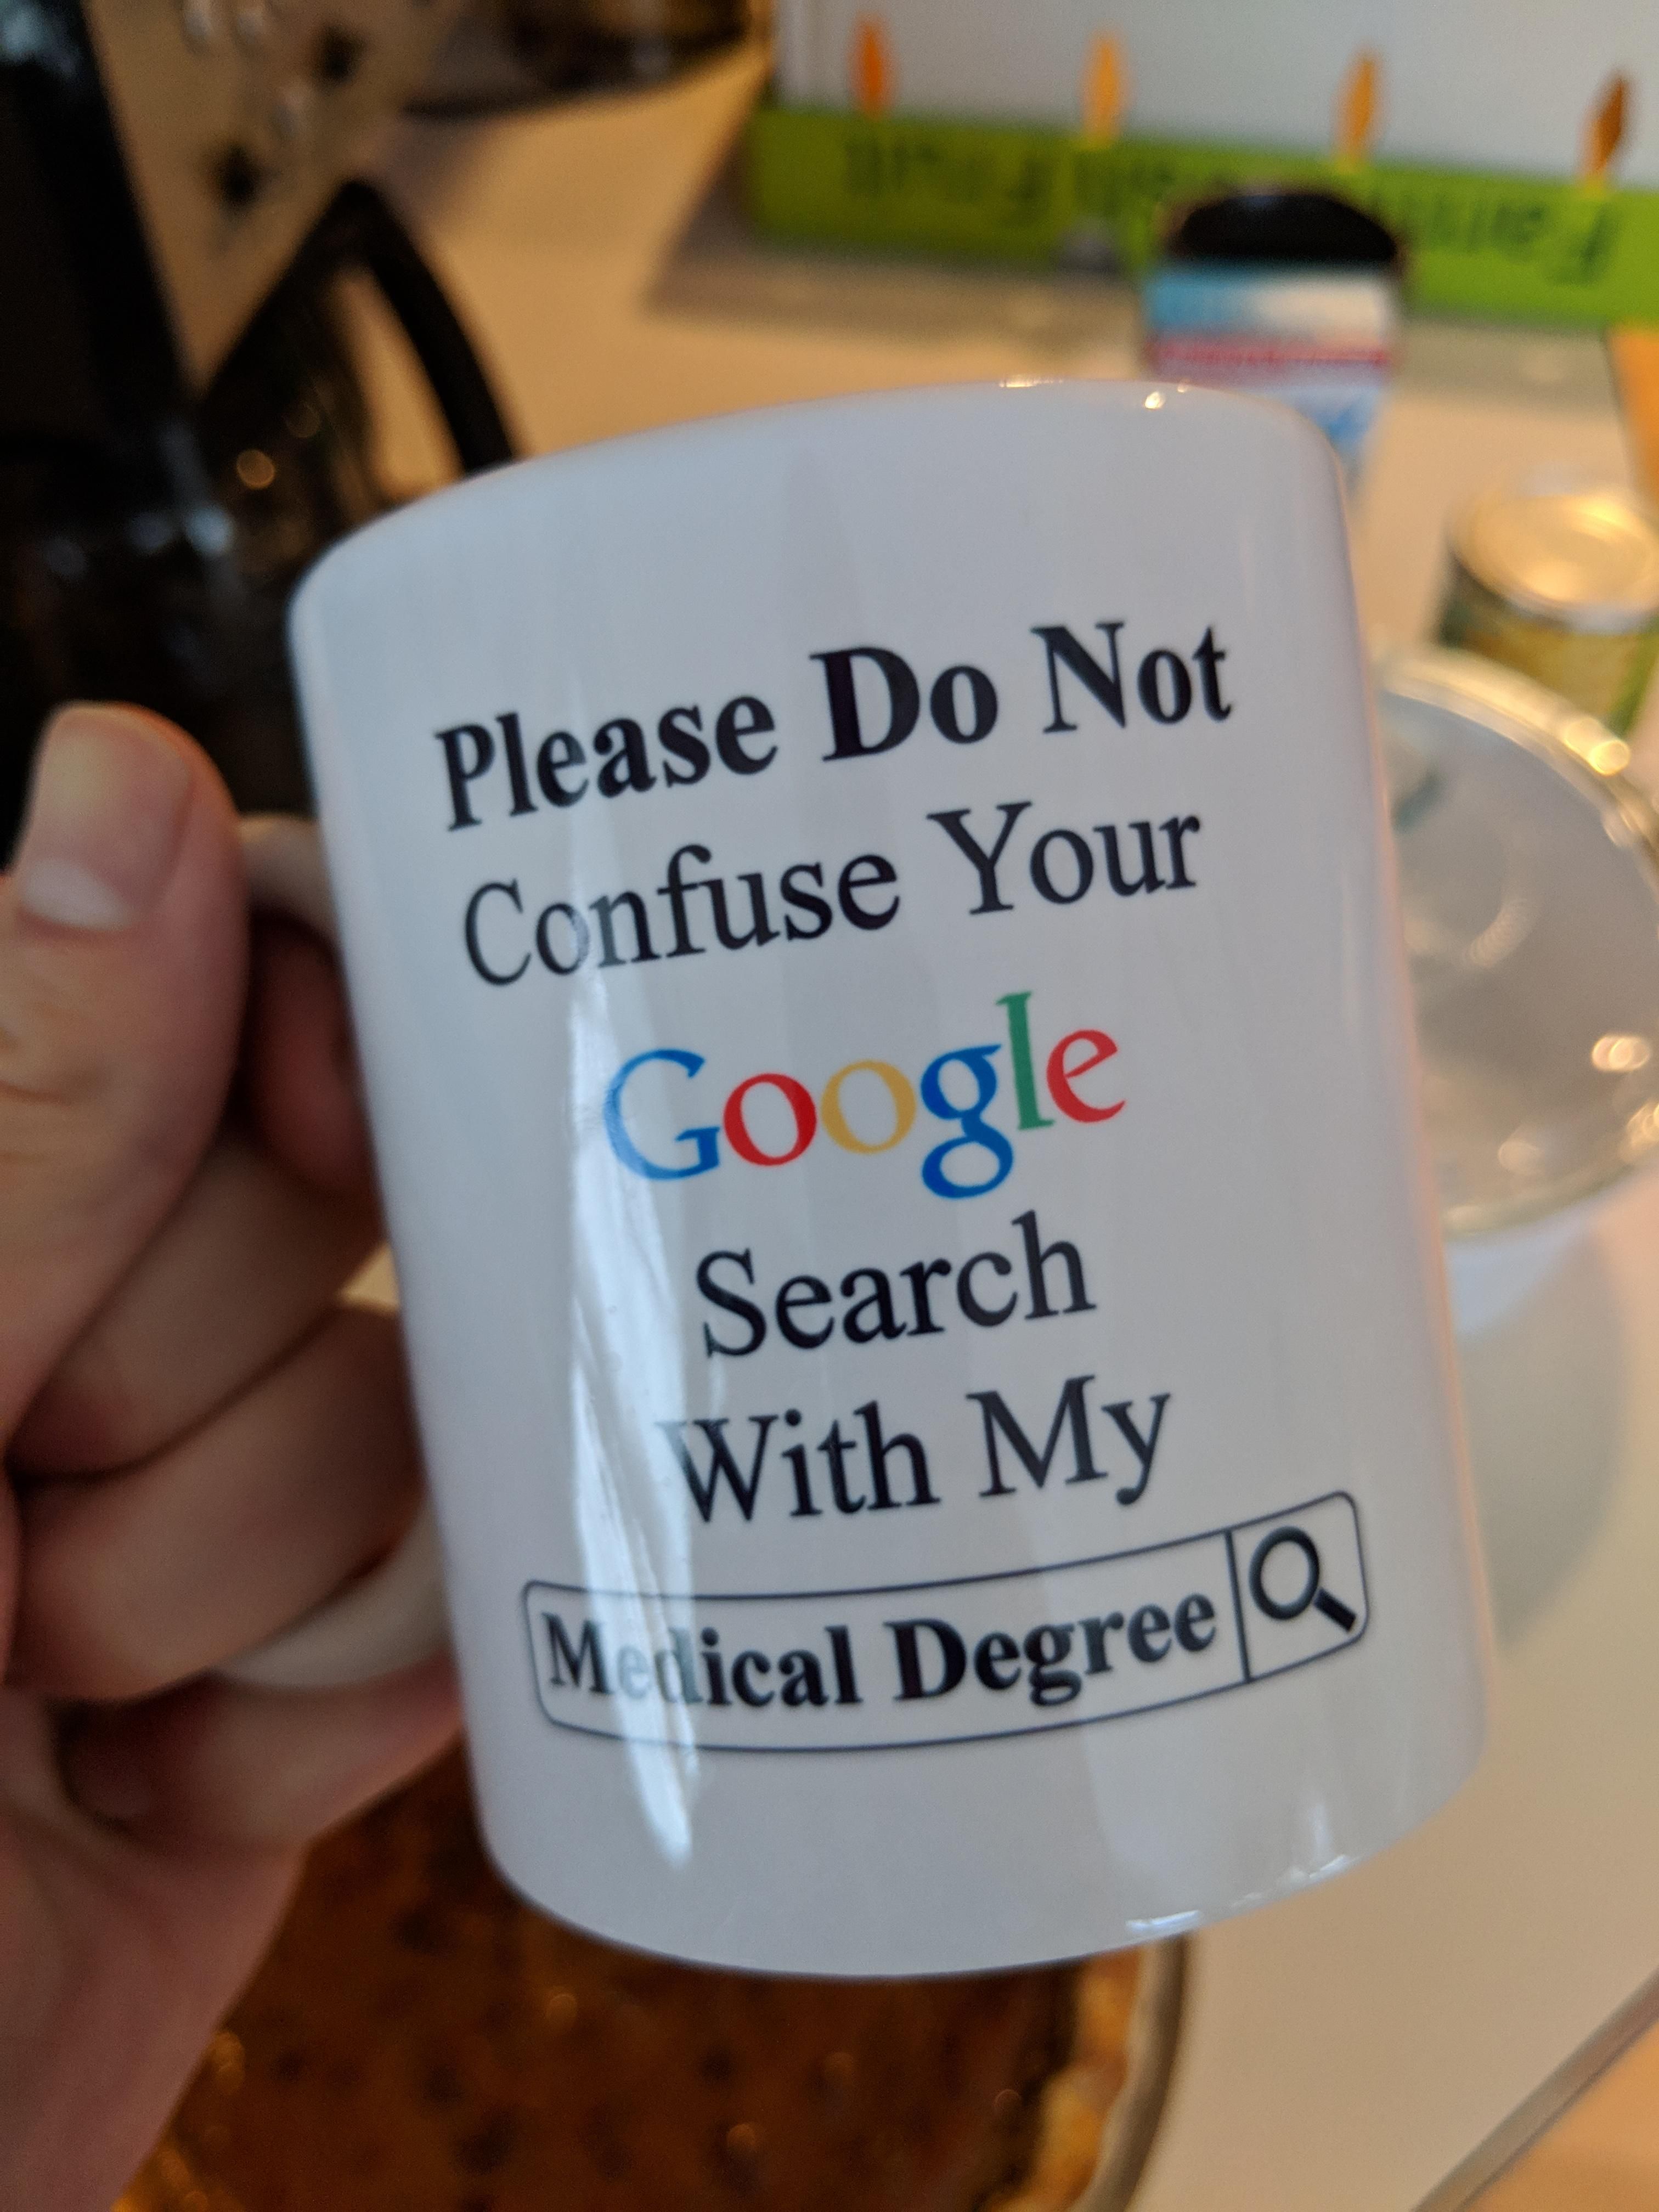 My uncle is an infectious disease doctor. Found this perfect mug at his house today.